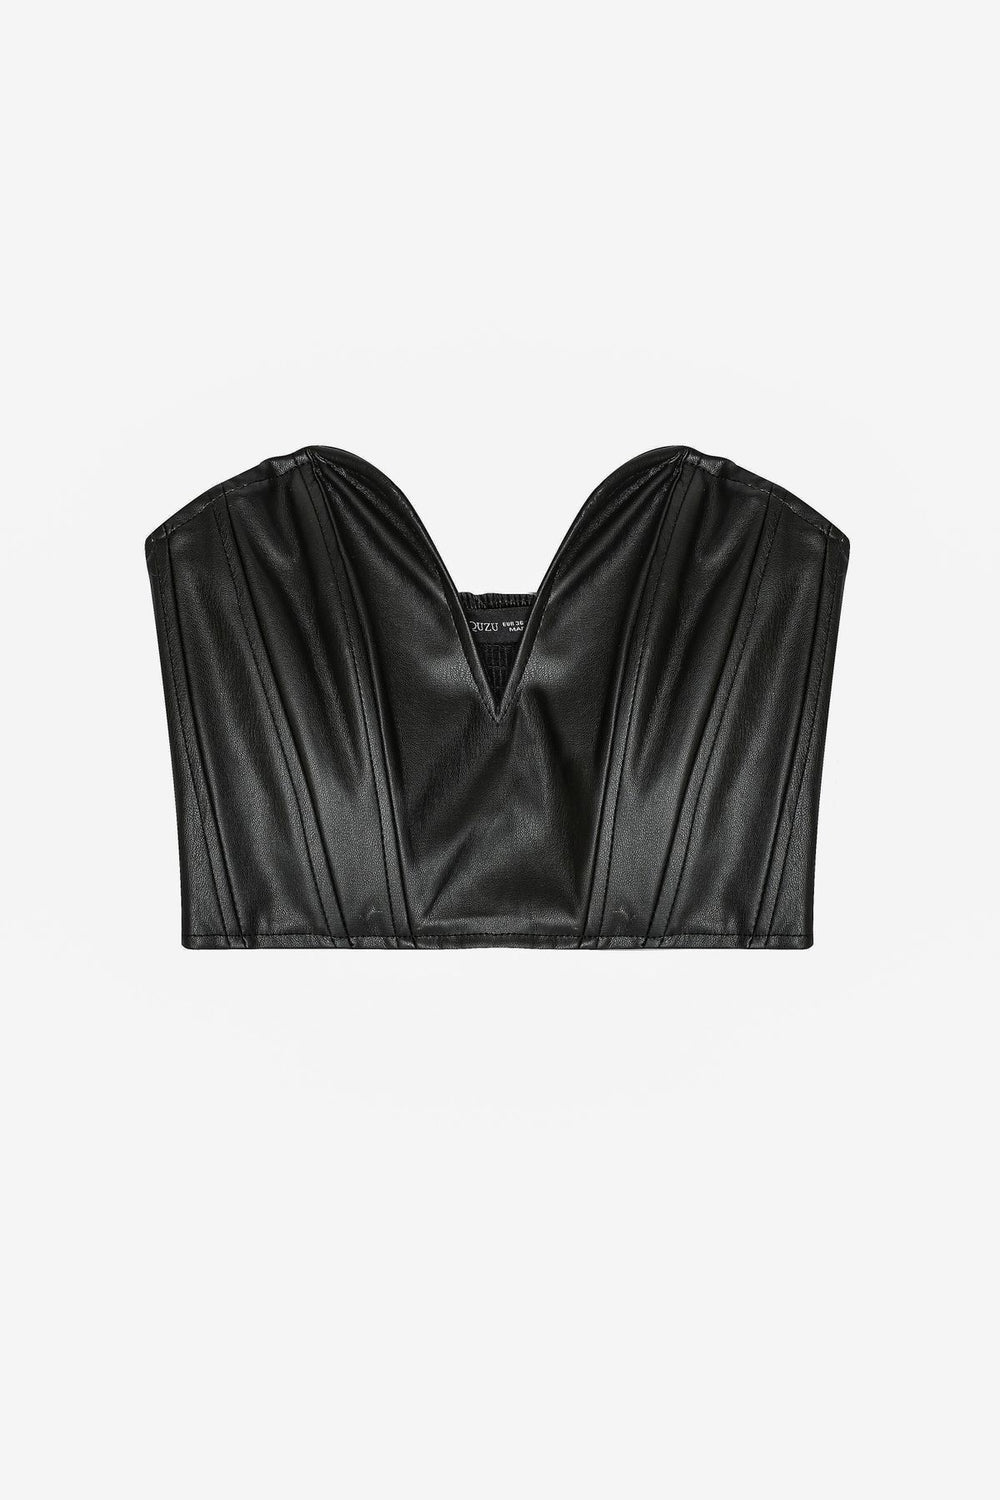 Strapless Leather Bustier Black